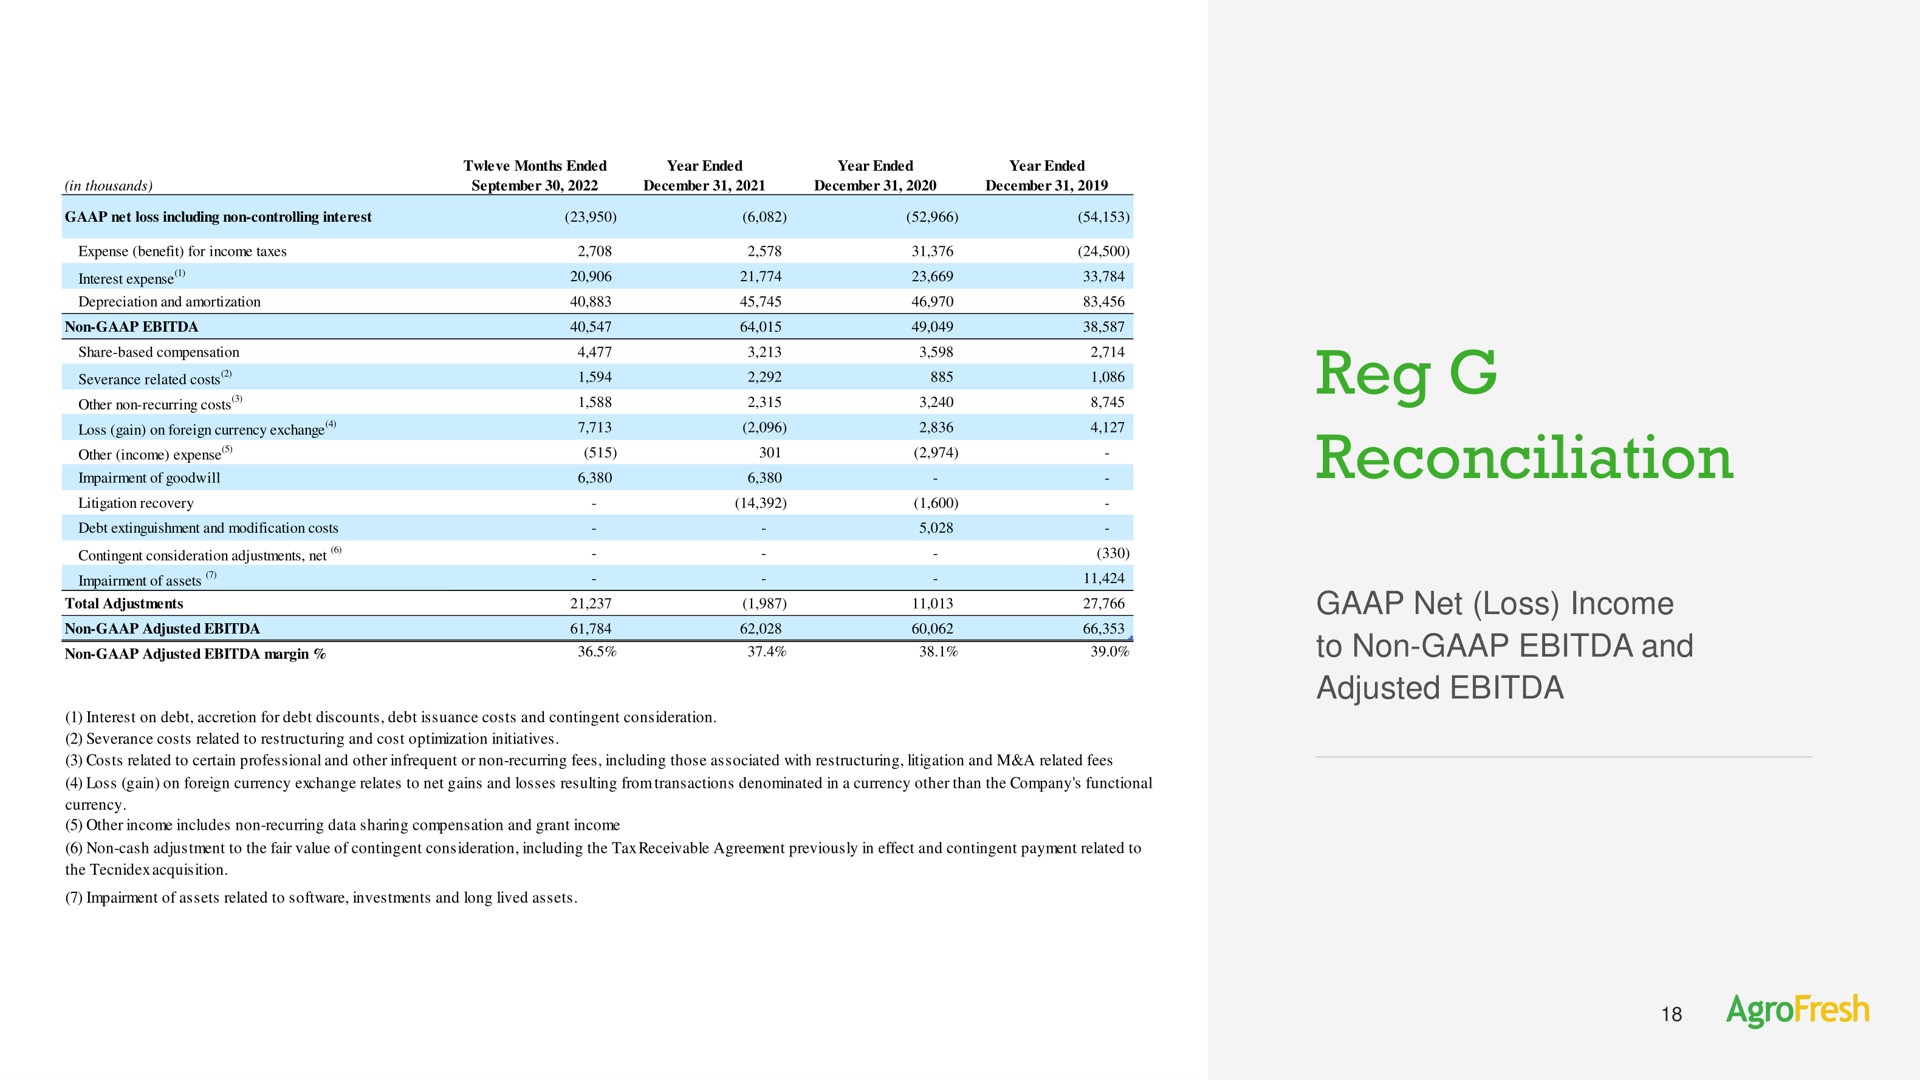 reg reconciliation net loss income to non and adjusted | AgroFresh